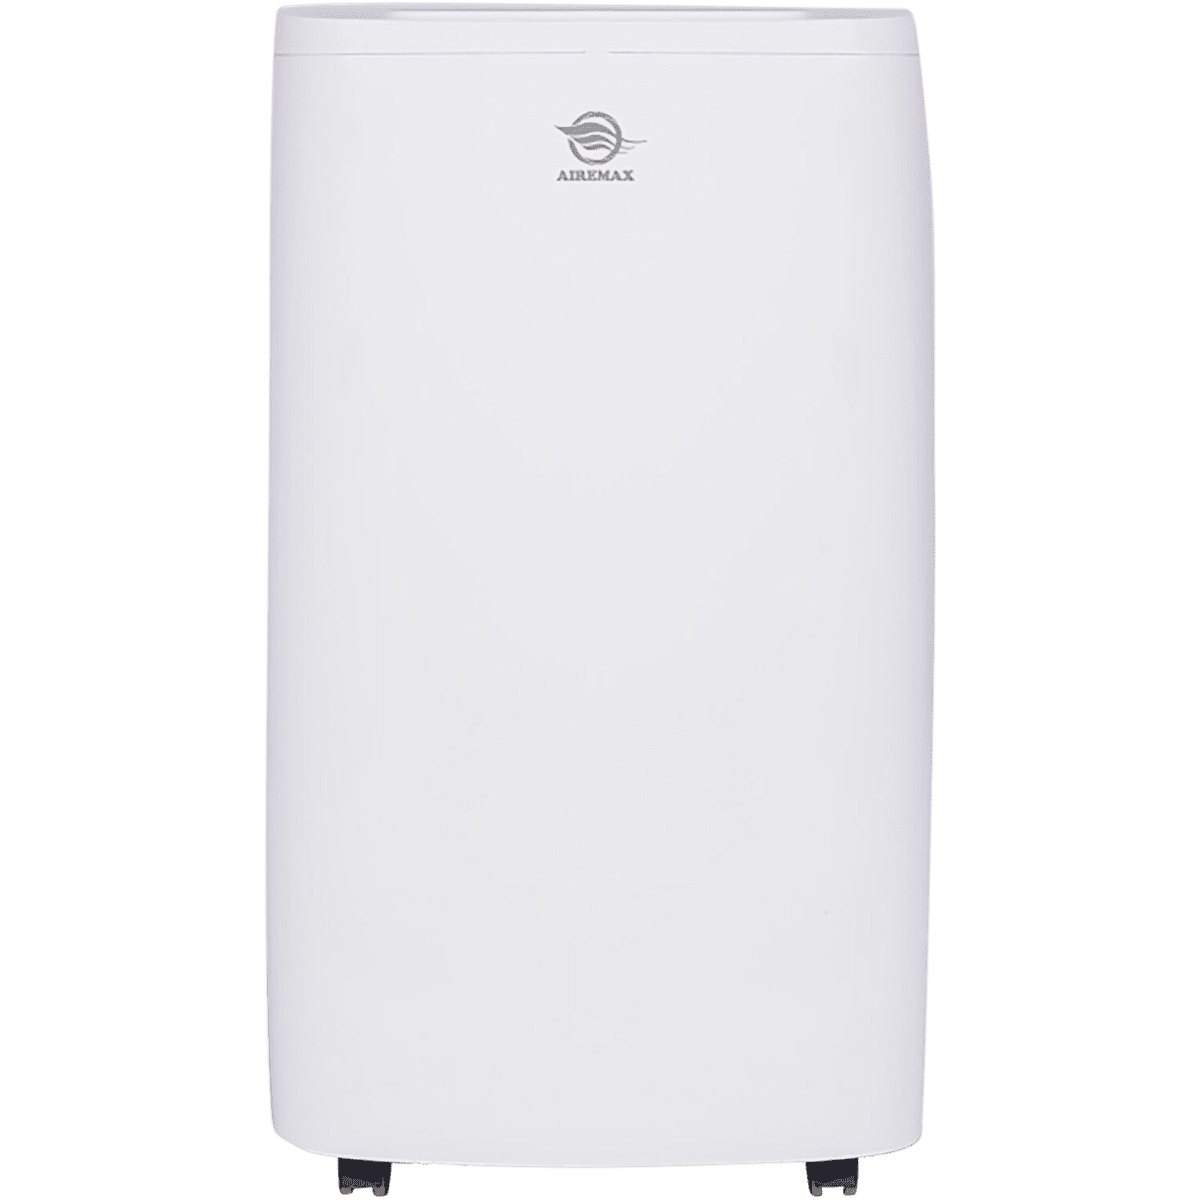 Commercial Cool Portable Air Conditioner with Heat, 10,000 BTU, White